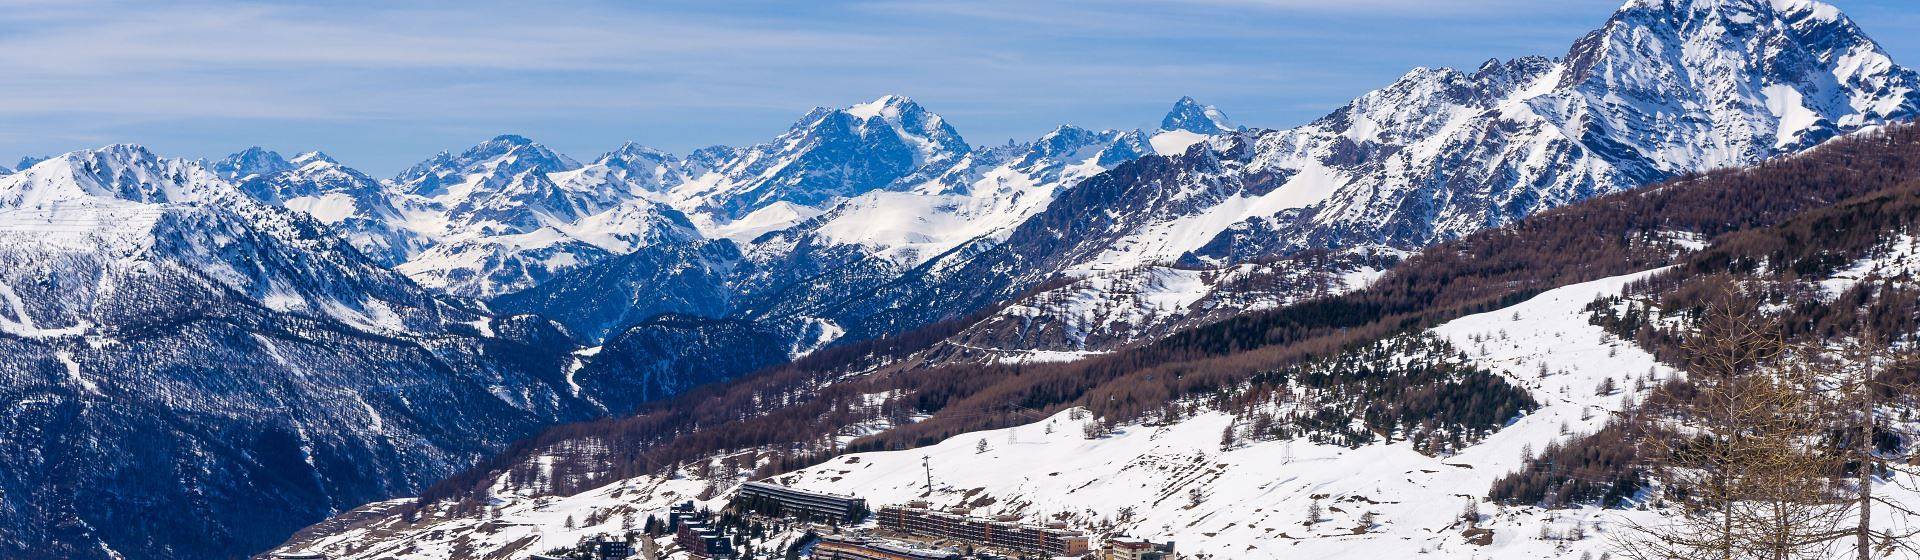 Holidays to Sestriere Image